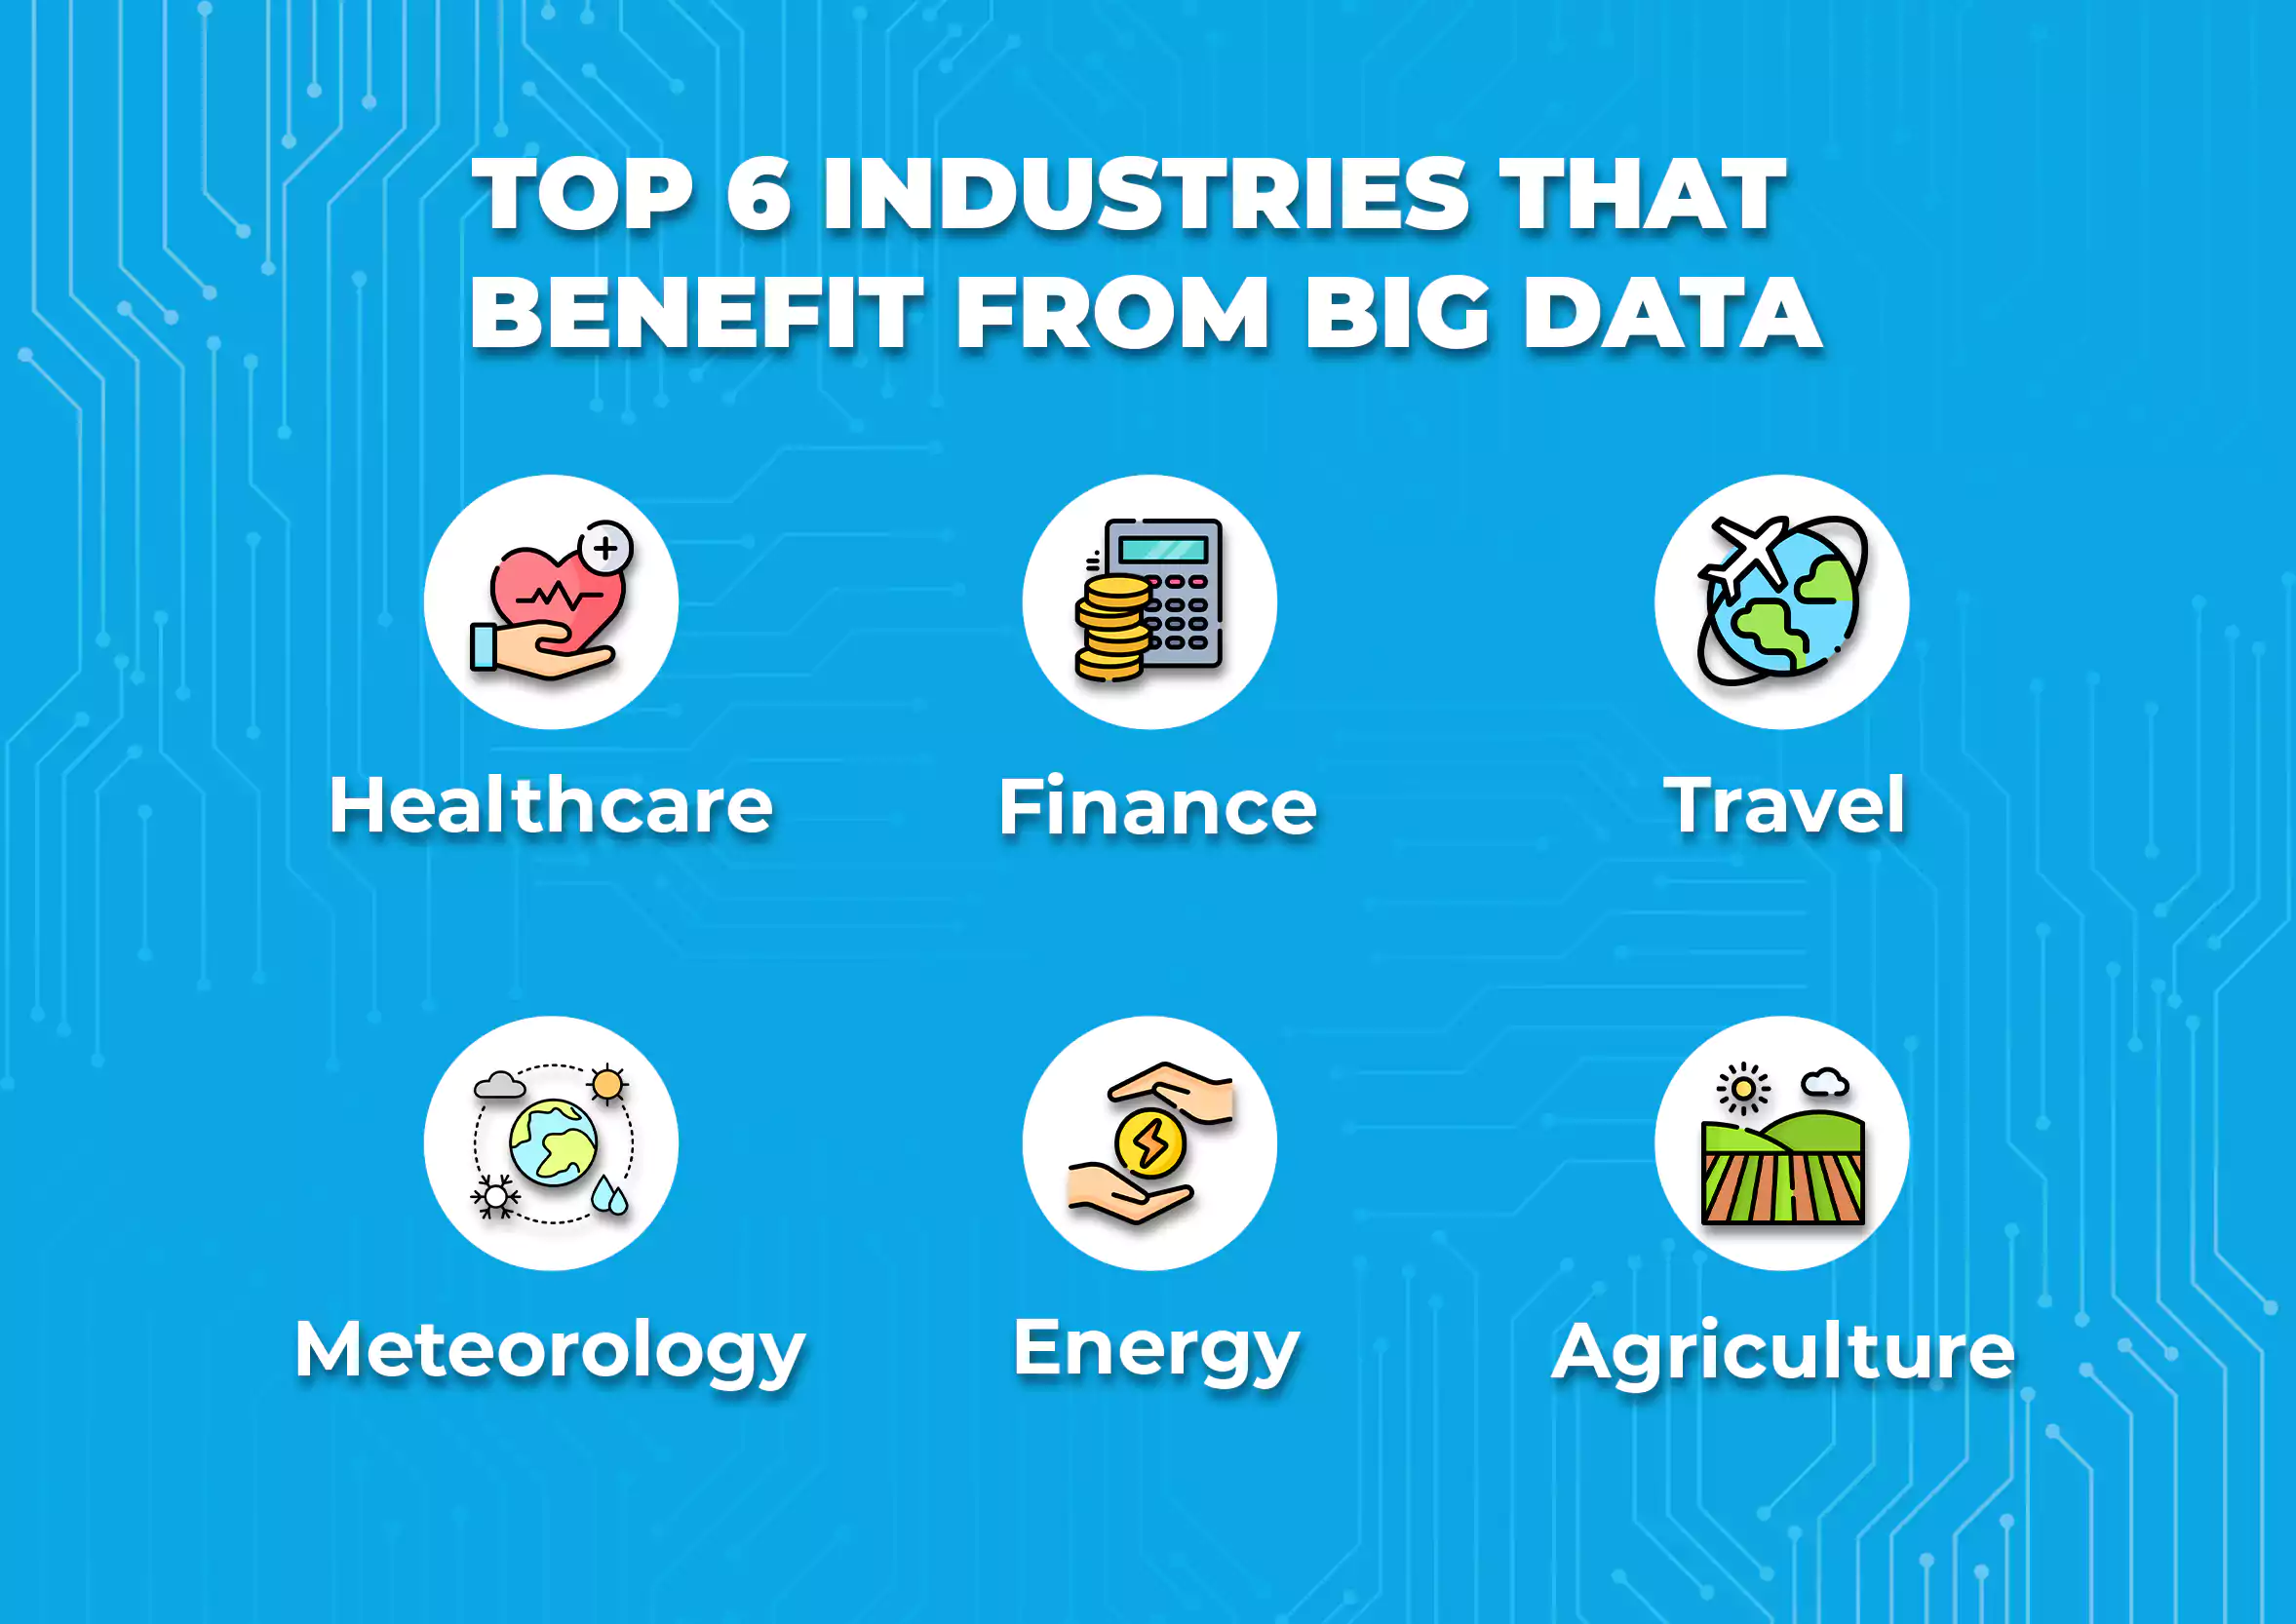 Top 6 industries that benefit from big data